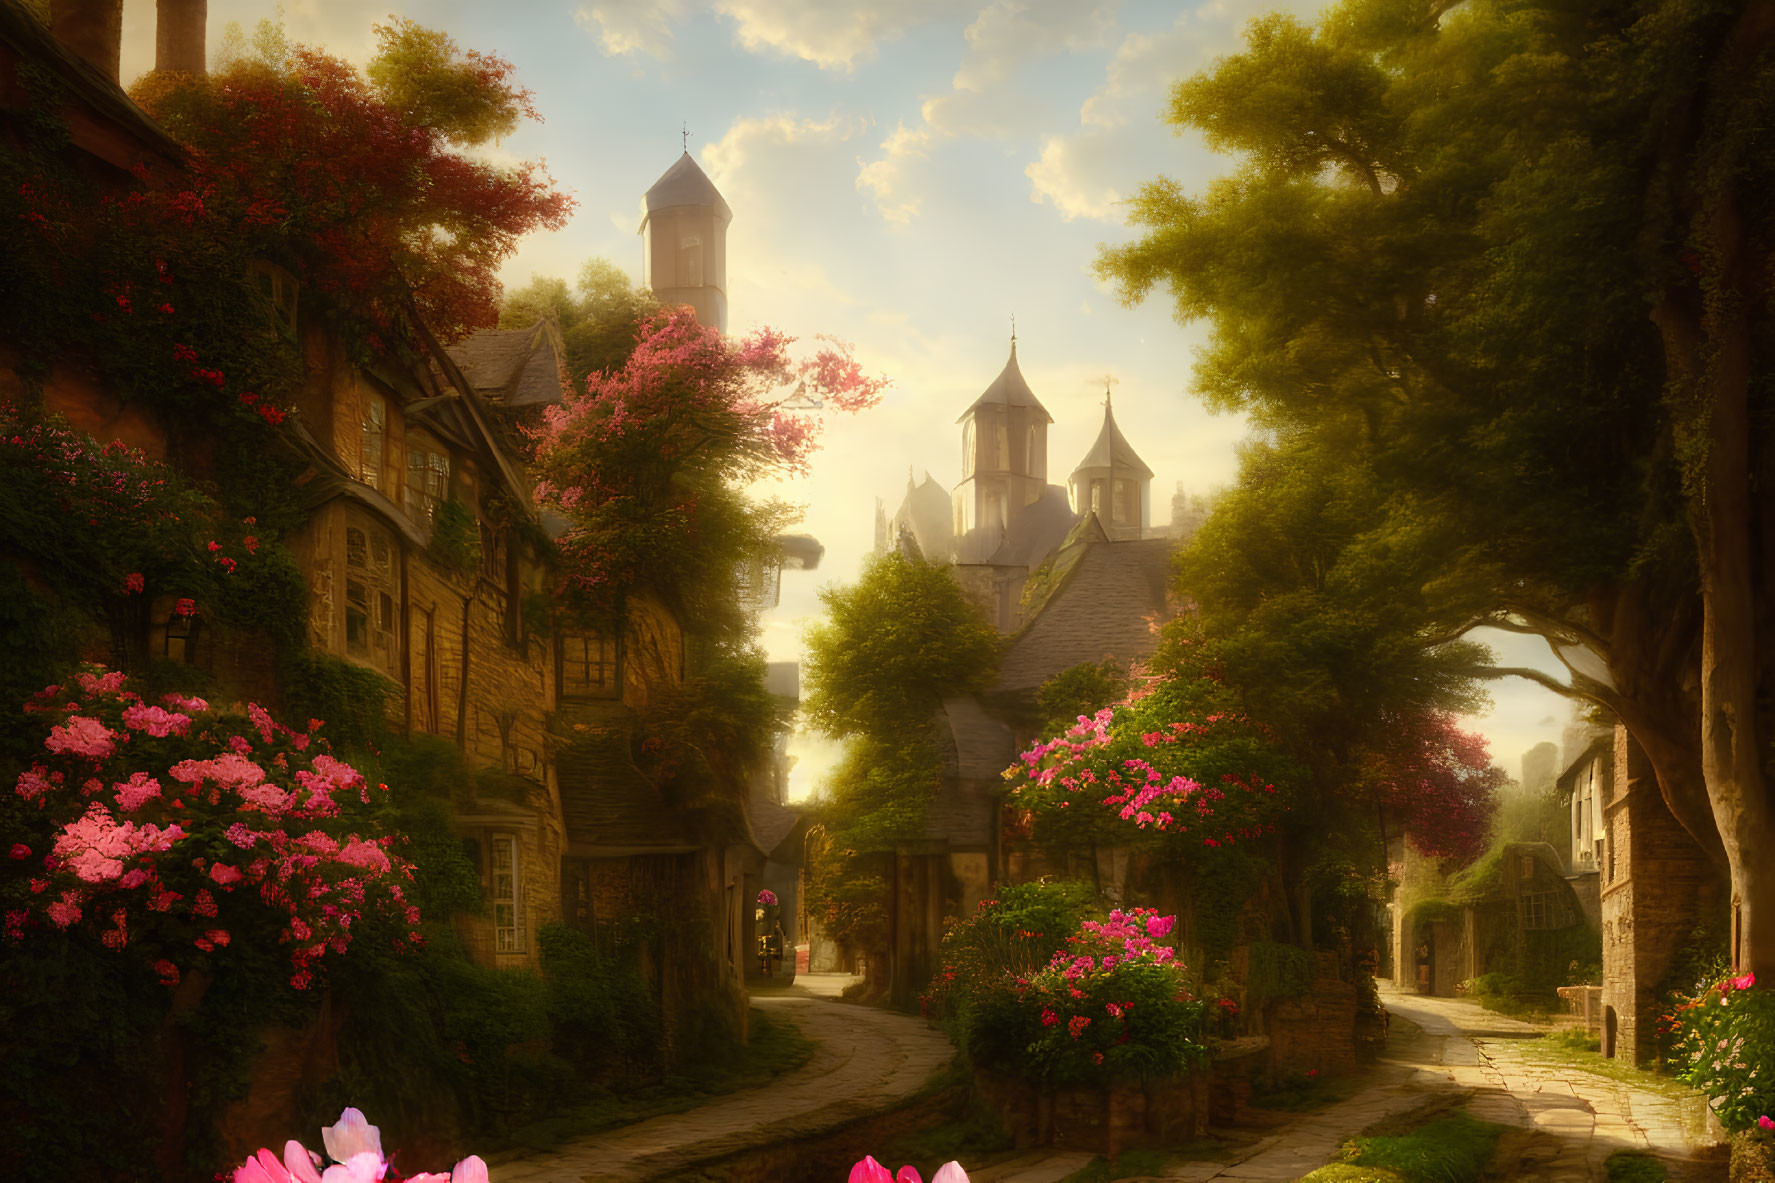 Tranquil cobblestone street with ivy-covered houses and blooming flowers